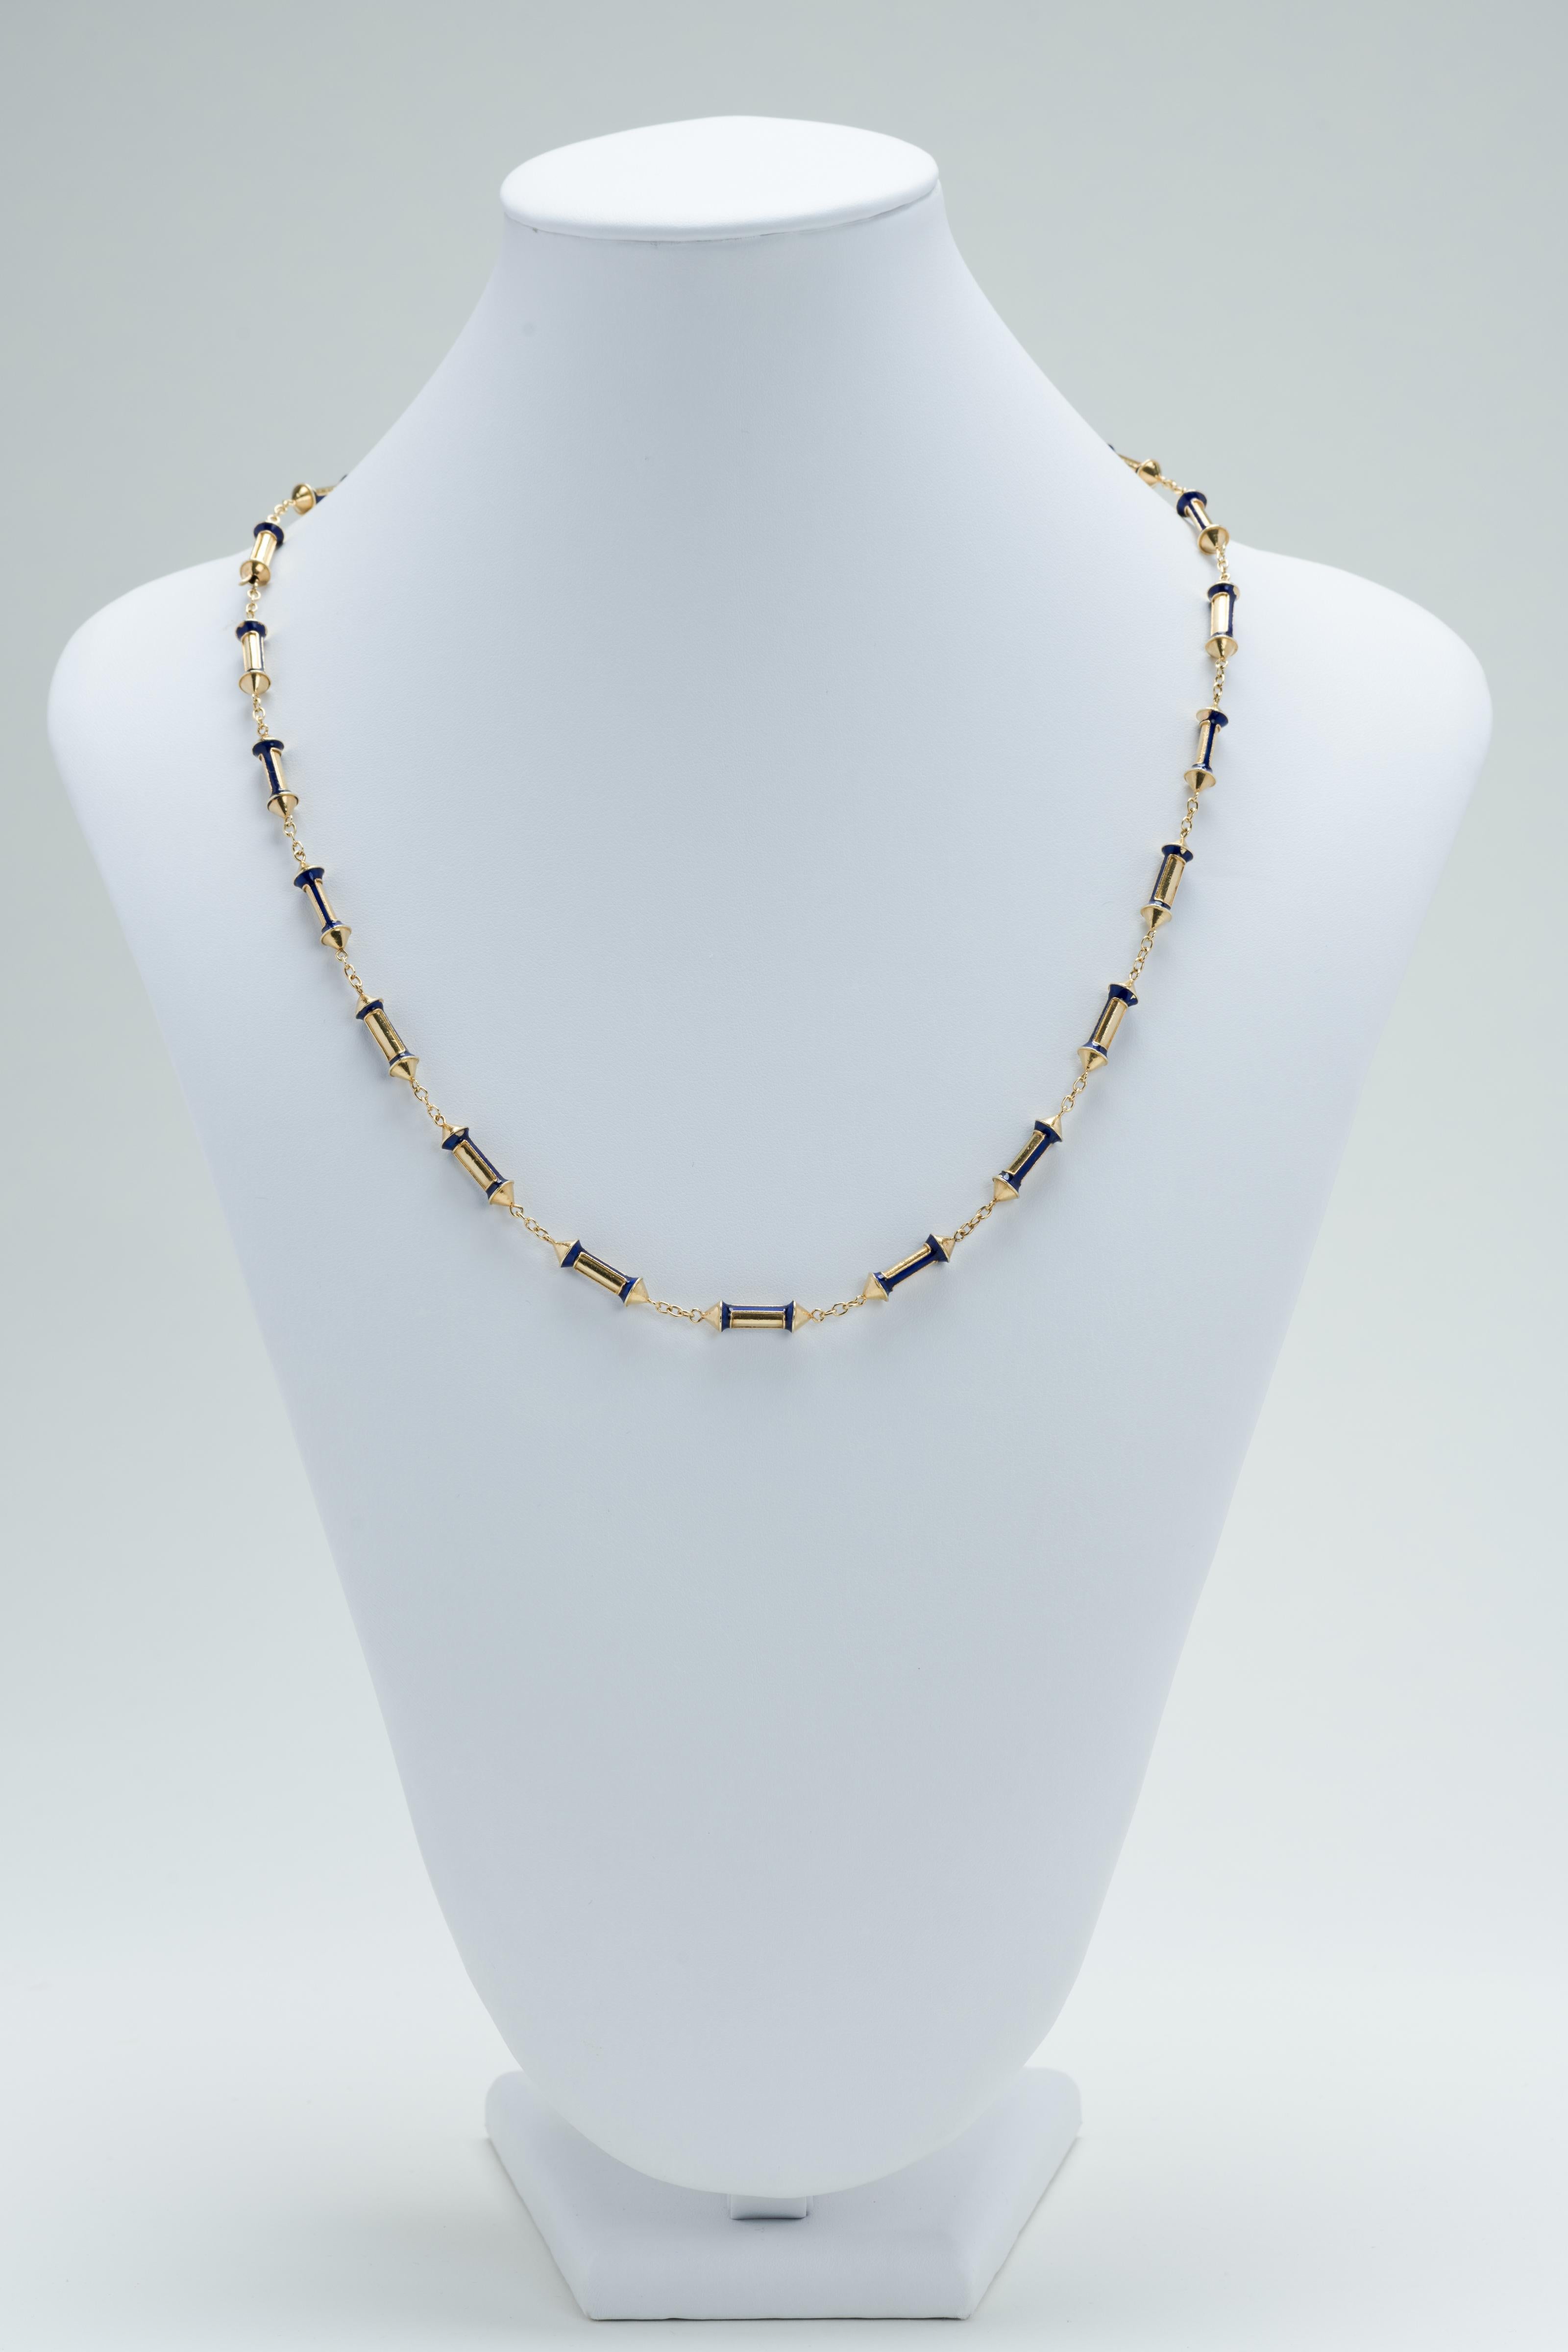 18 Karat Gold and Blue Enamel Detachable Link Necklace In Excellent Condition For Sale In West Hollywood, CA